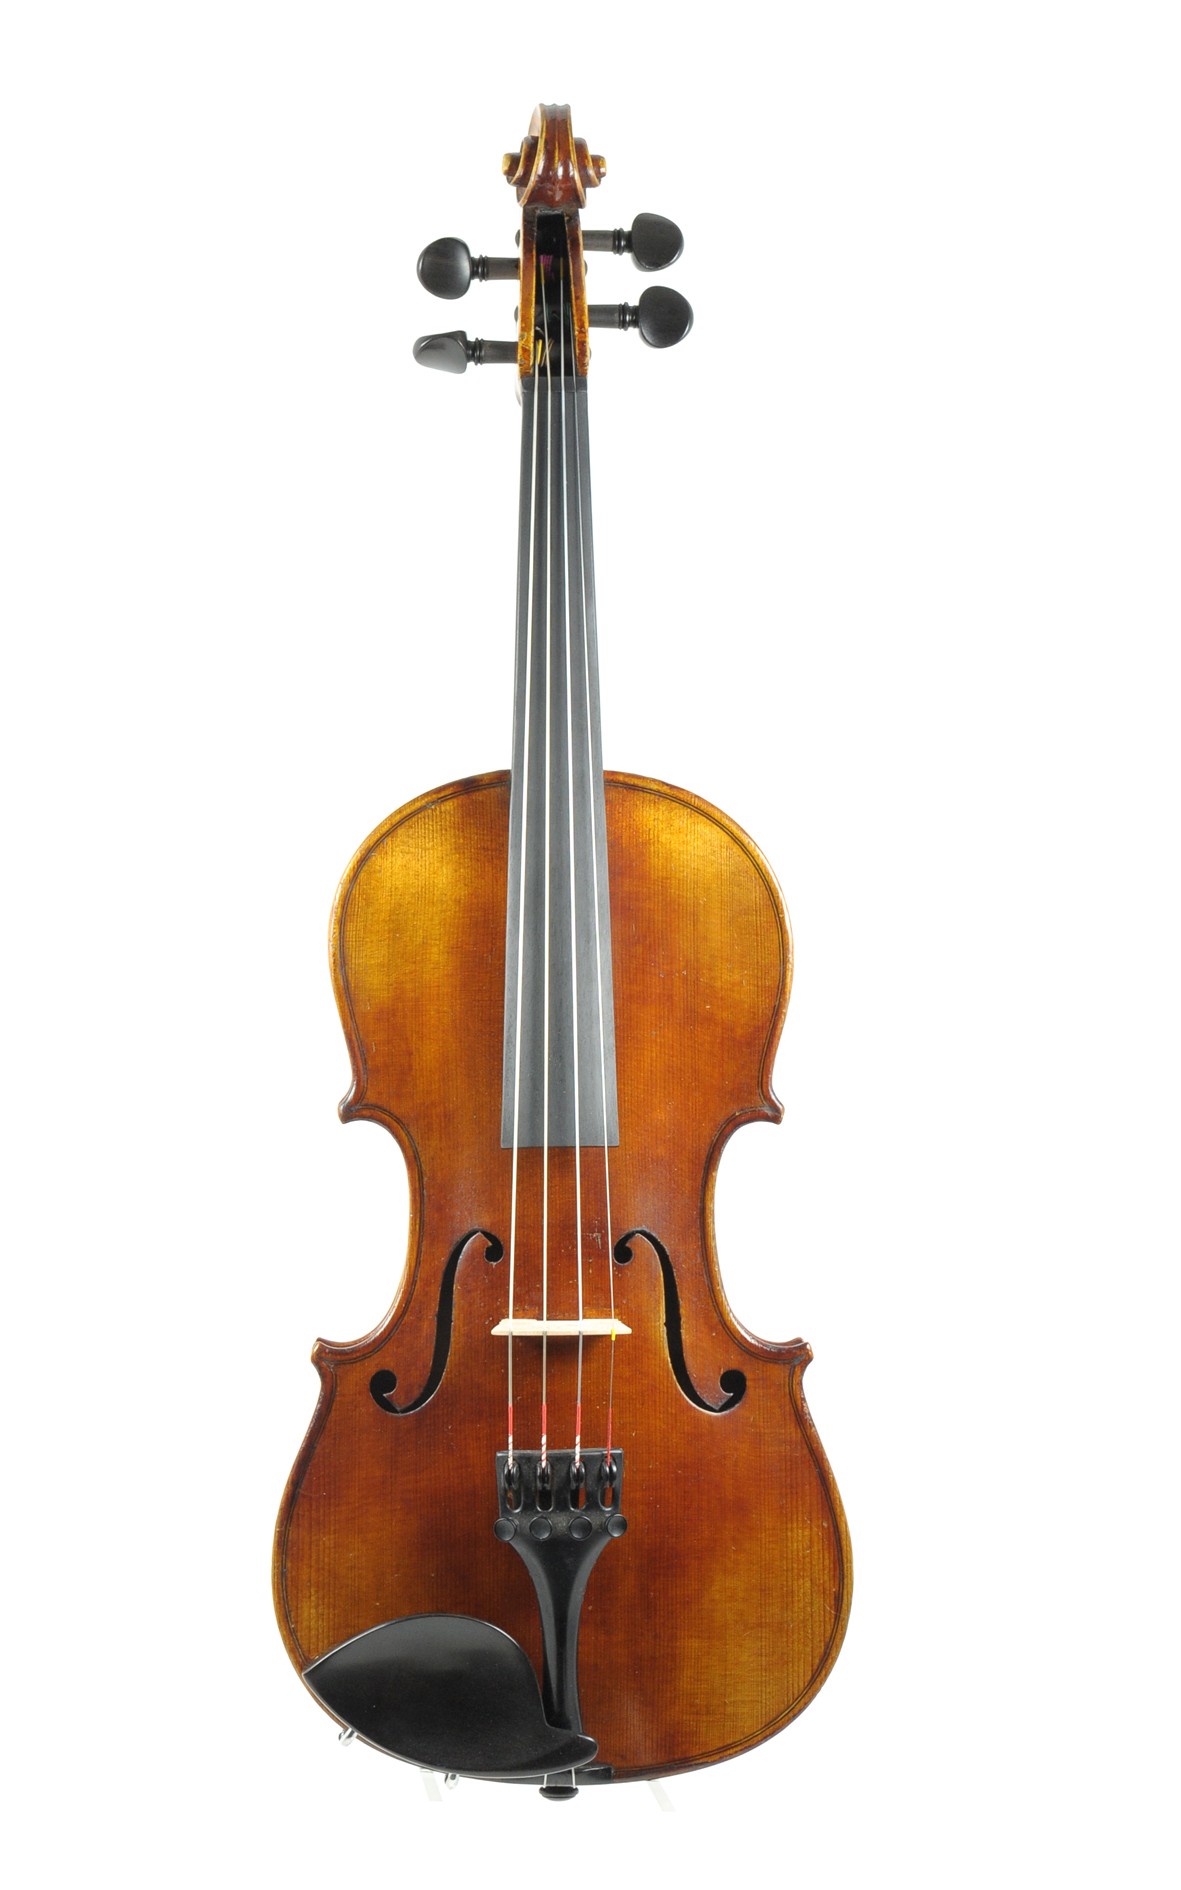 3/4 violin of the 1920s - front view